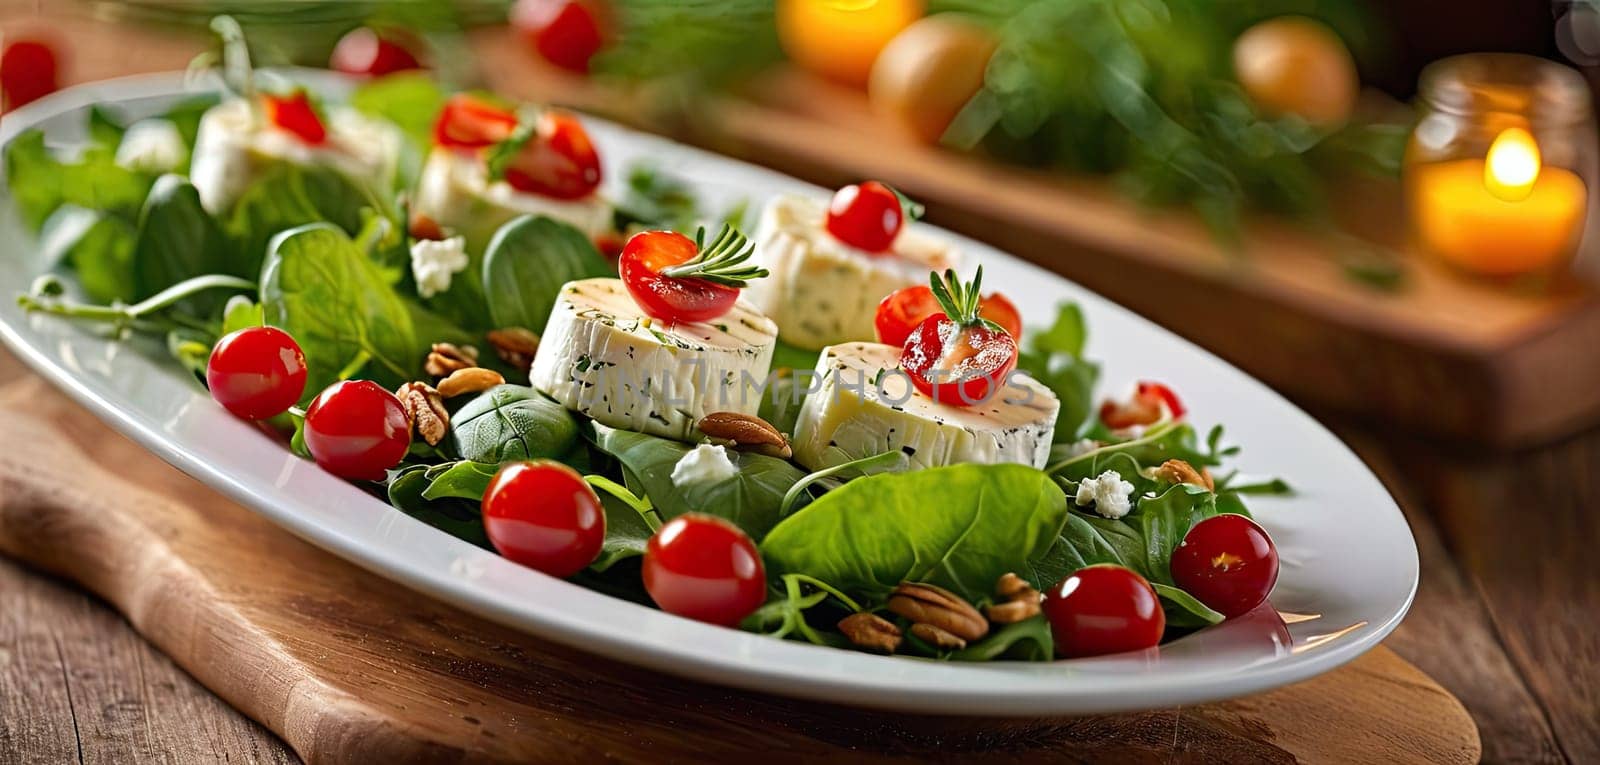 Goat cheese salad wit tomatoes on rustic wooden table. Fresh greens mingle with cheese, farm-to-table freshness of organic produce by panophotograph